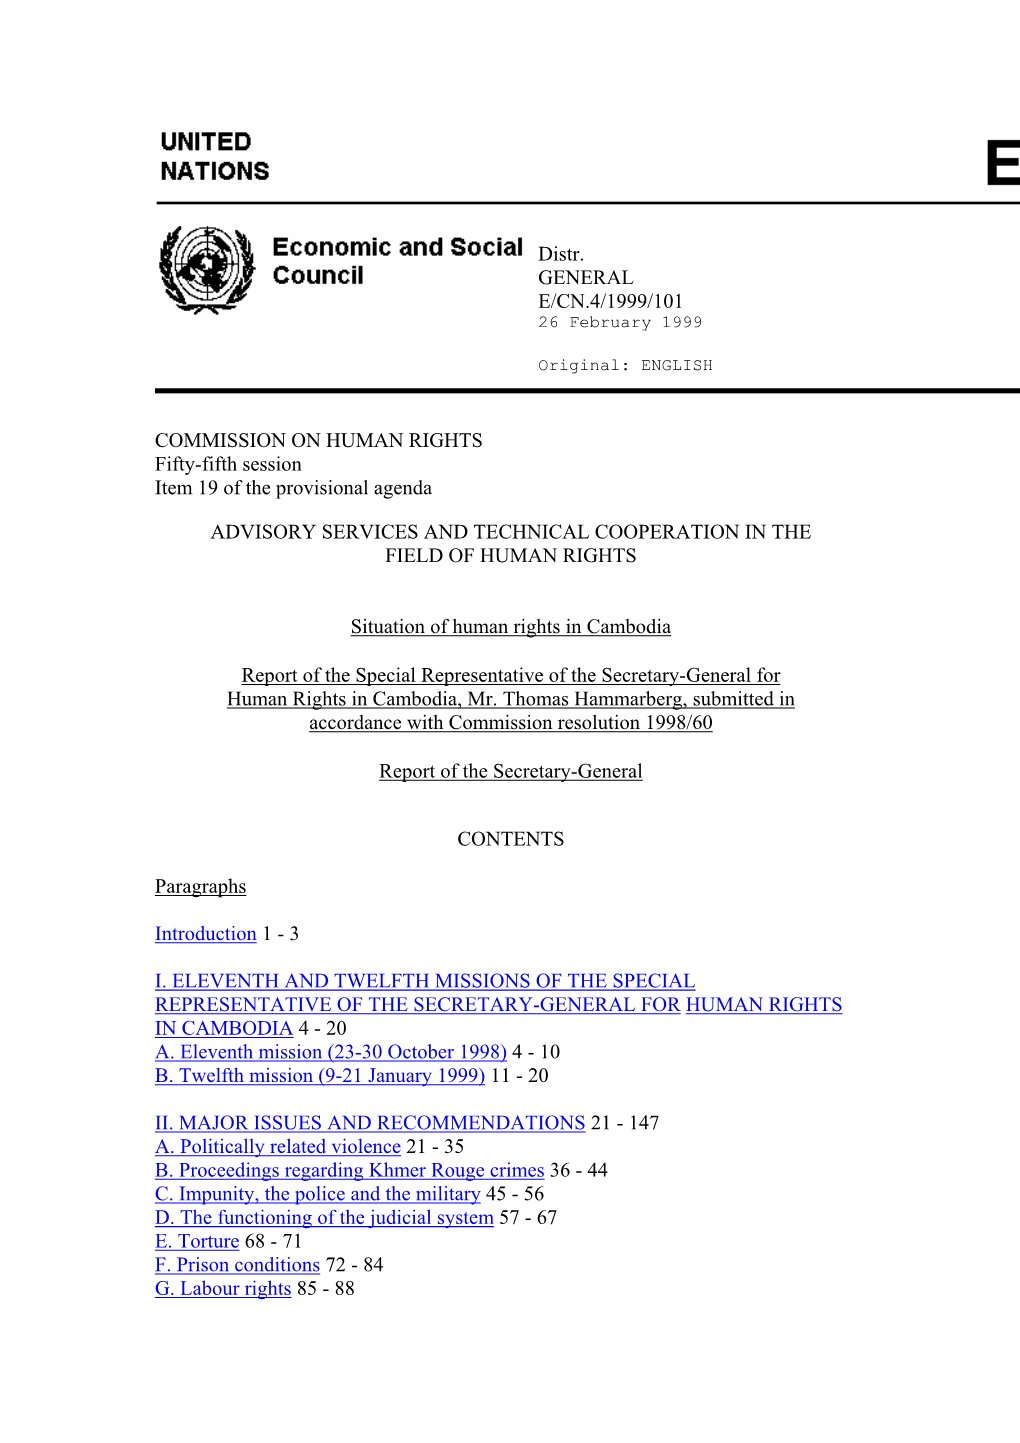 Report of the Special Representative of the Secretary-General for Human Rights in Cambodia, Mr